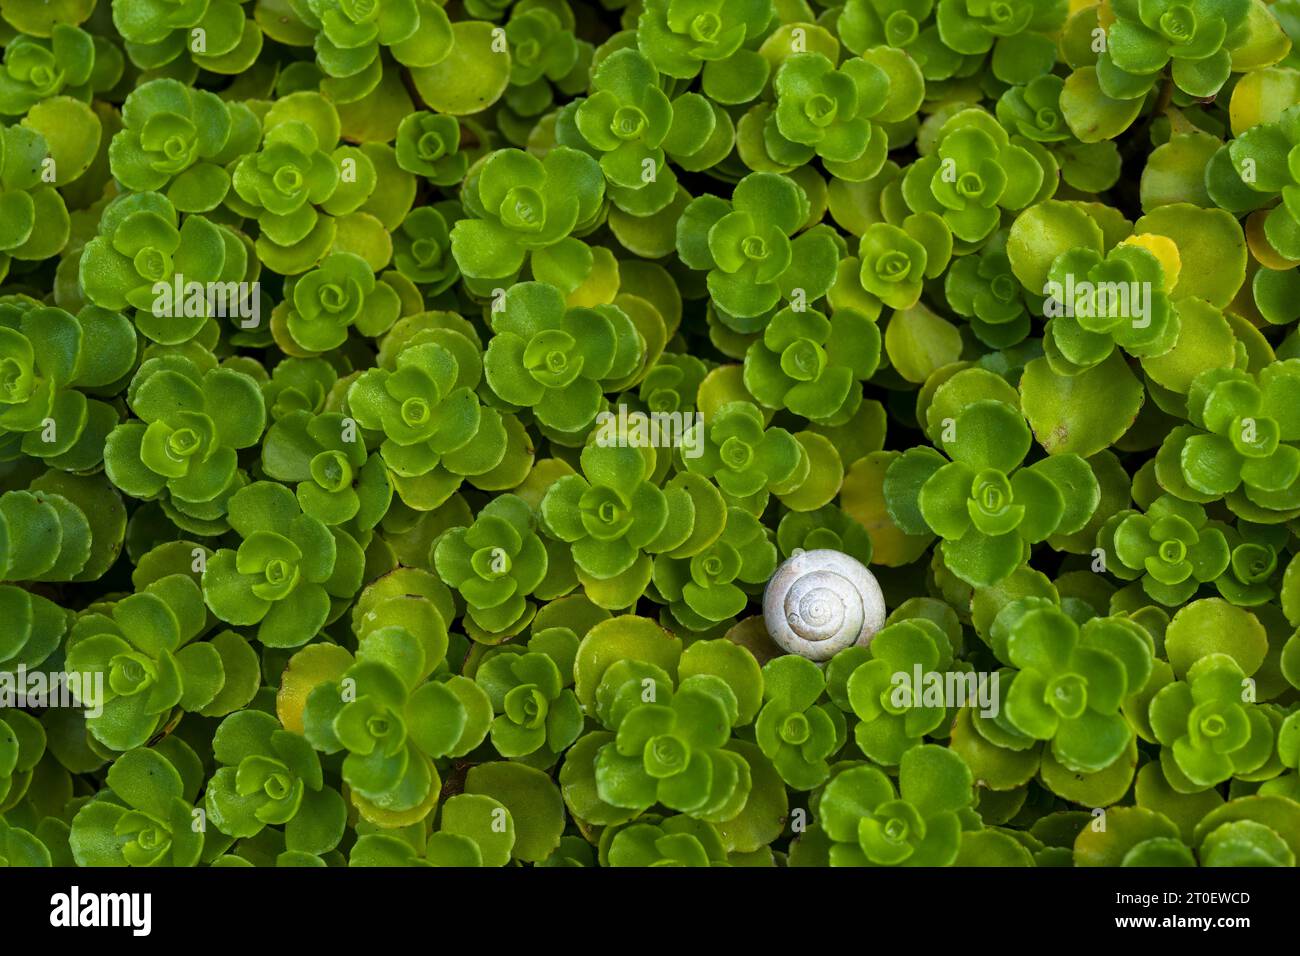 a small snail shell hides between the rosettes of the carpet fat leaf (Sedum spurium), top view, Germany Stock Photo